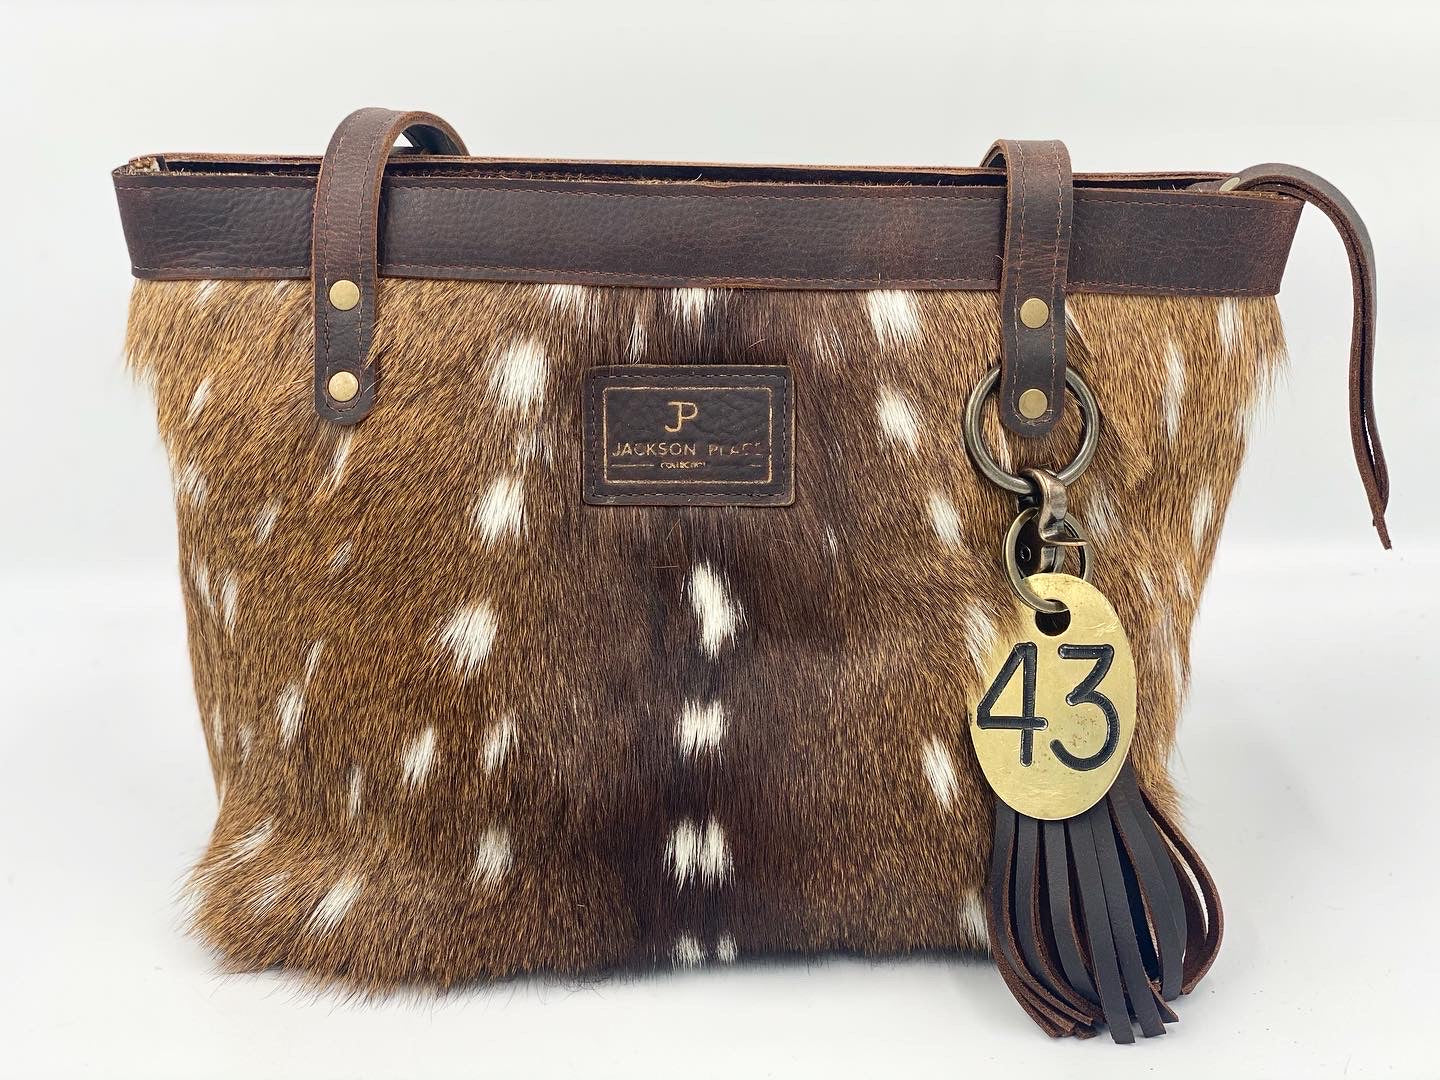 Barrington Gifts CAPTAIN'S BAG LEATHER PATCH AXIS COLLECTION Deer Hide  Print | eBay